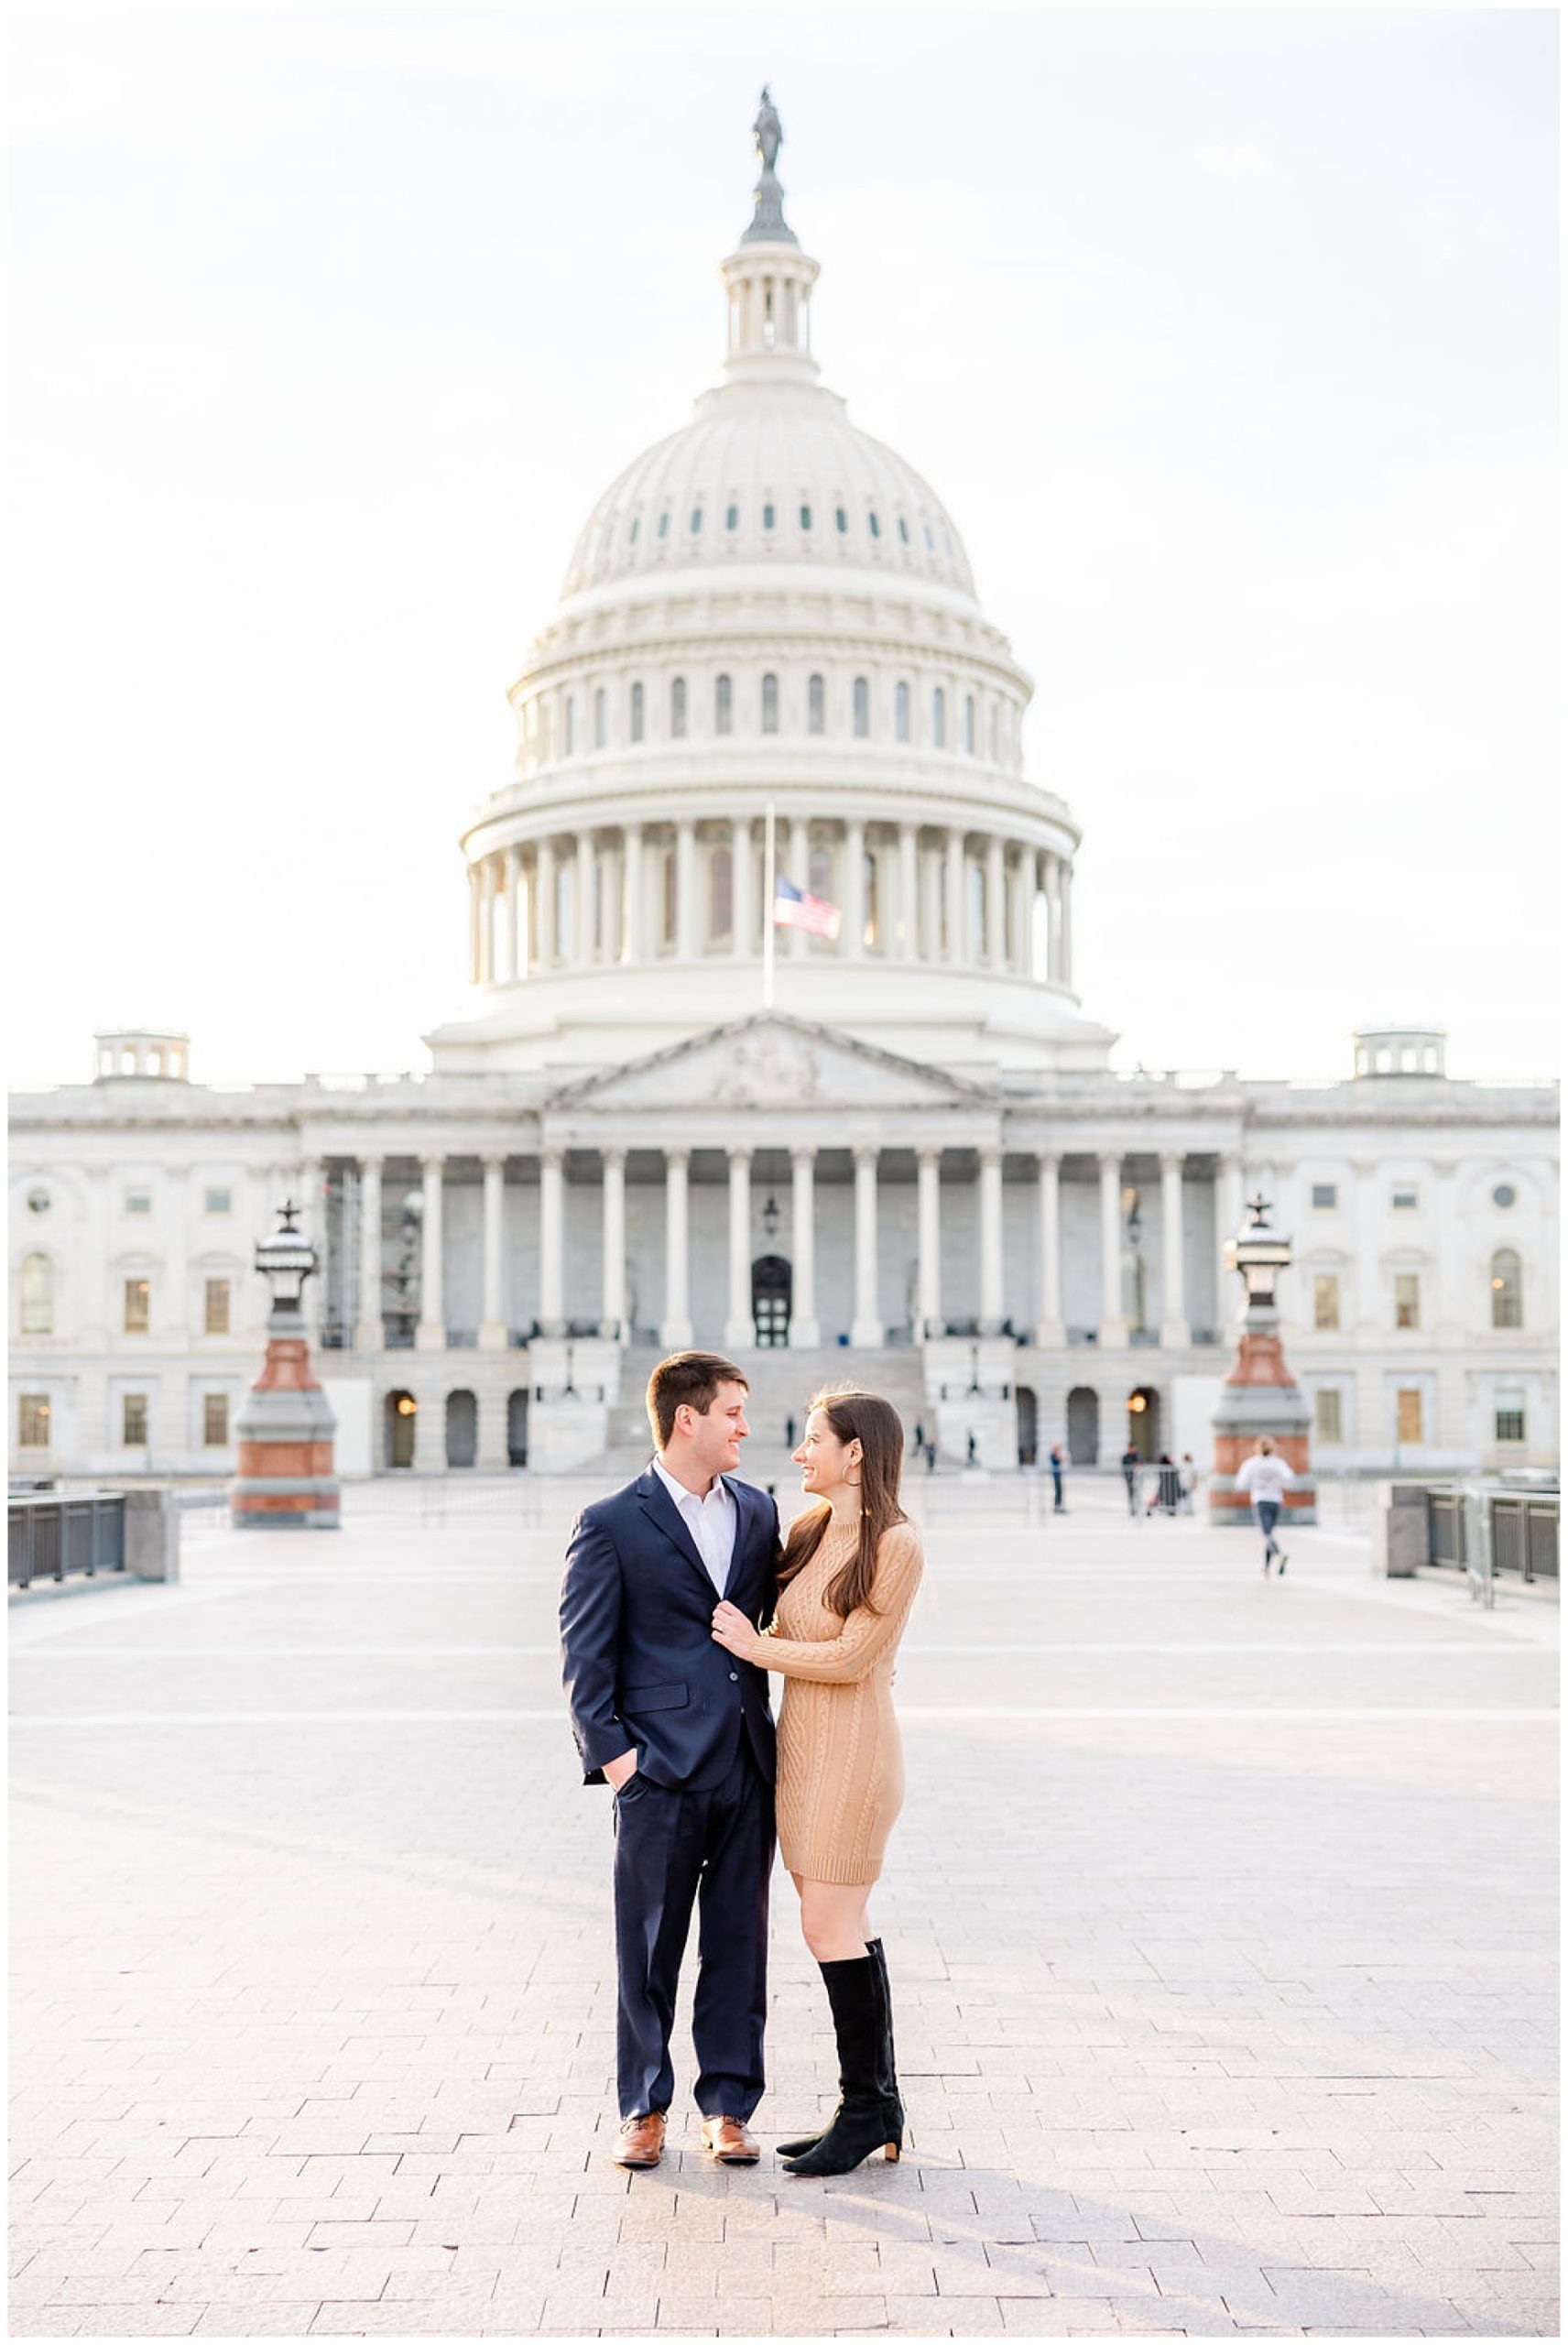 autumn Capitol Hill engagement session, Capitol Hill engagement photos, Capitol Hill photographer, DC engagement photography, DC engagement photographer, DC wedding photography, autumn engagement photos, casual engagement photos, Rachel E.H. Photography, couple smiling at each other, beige sweater dress, couple in front of capitol building